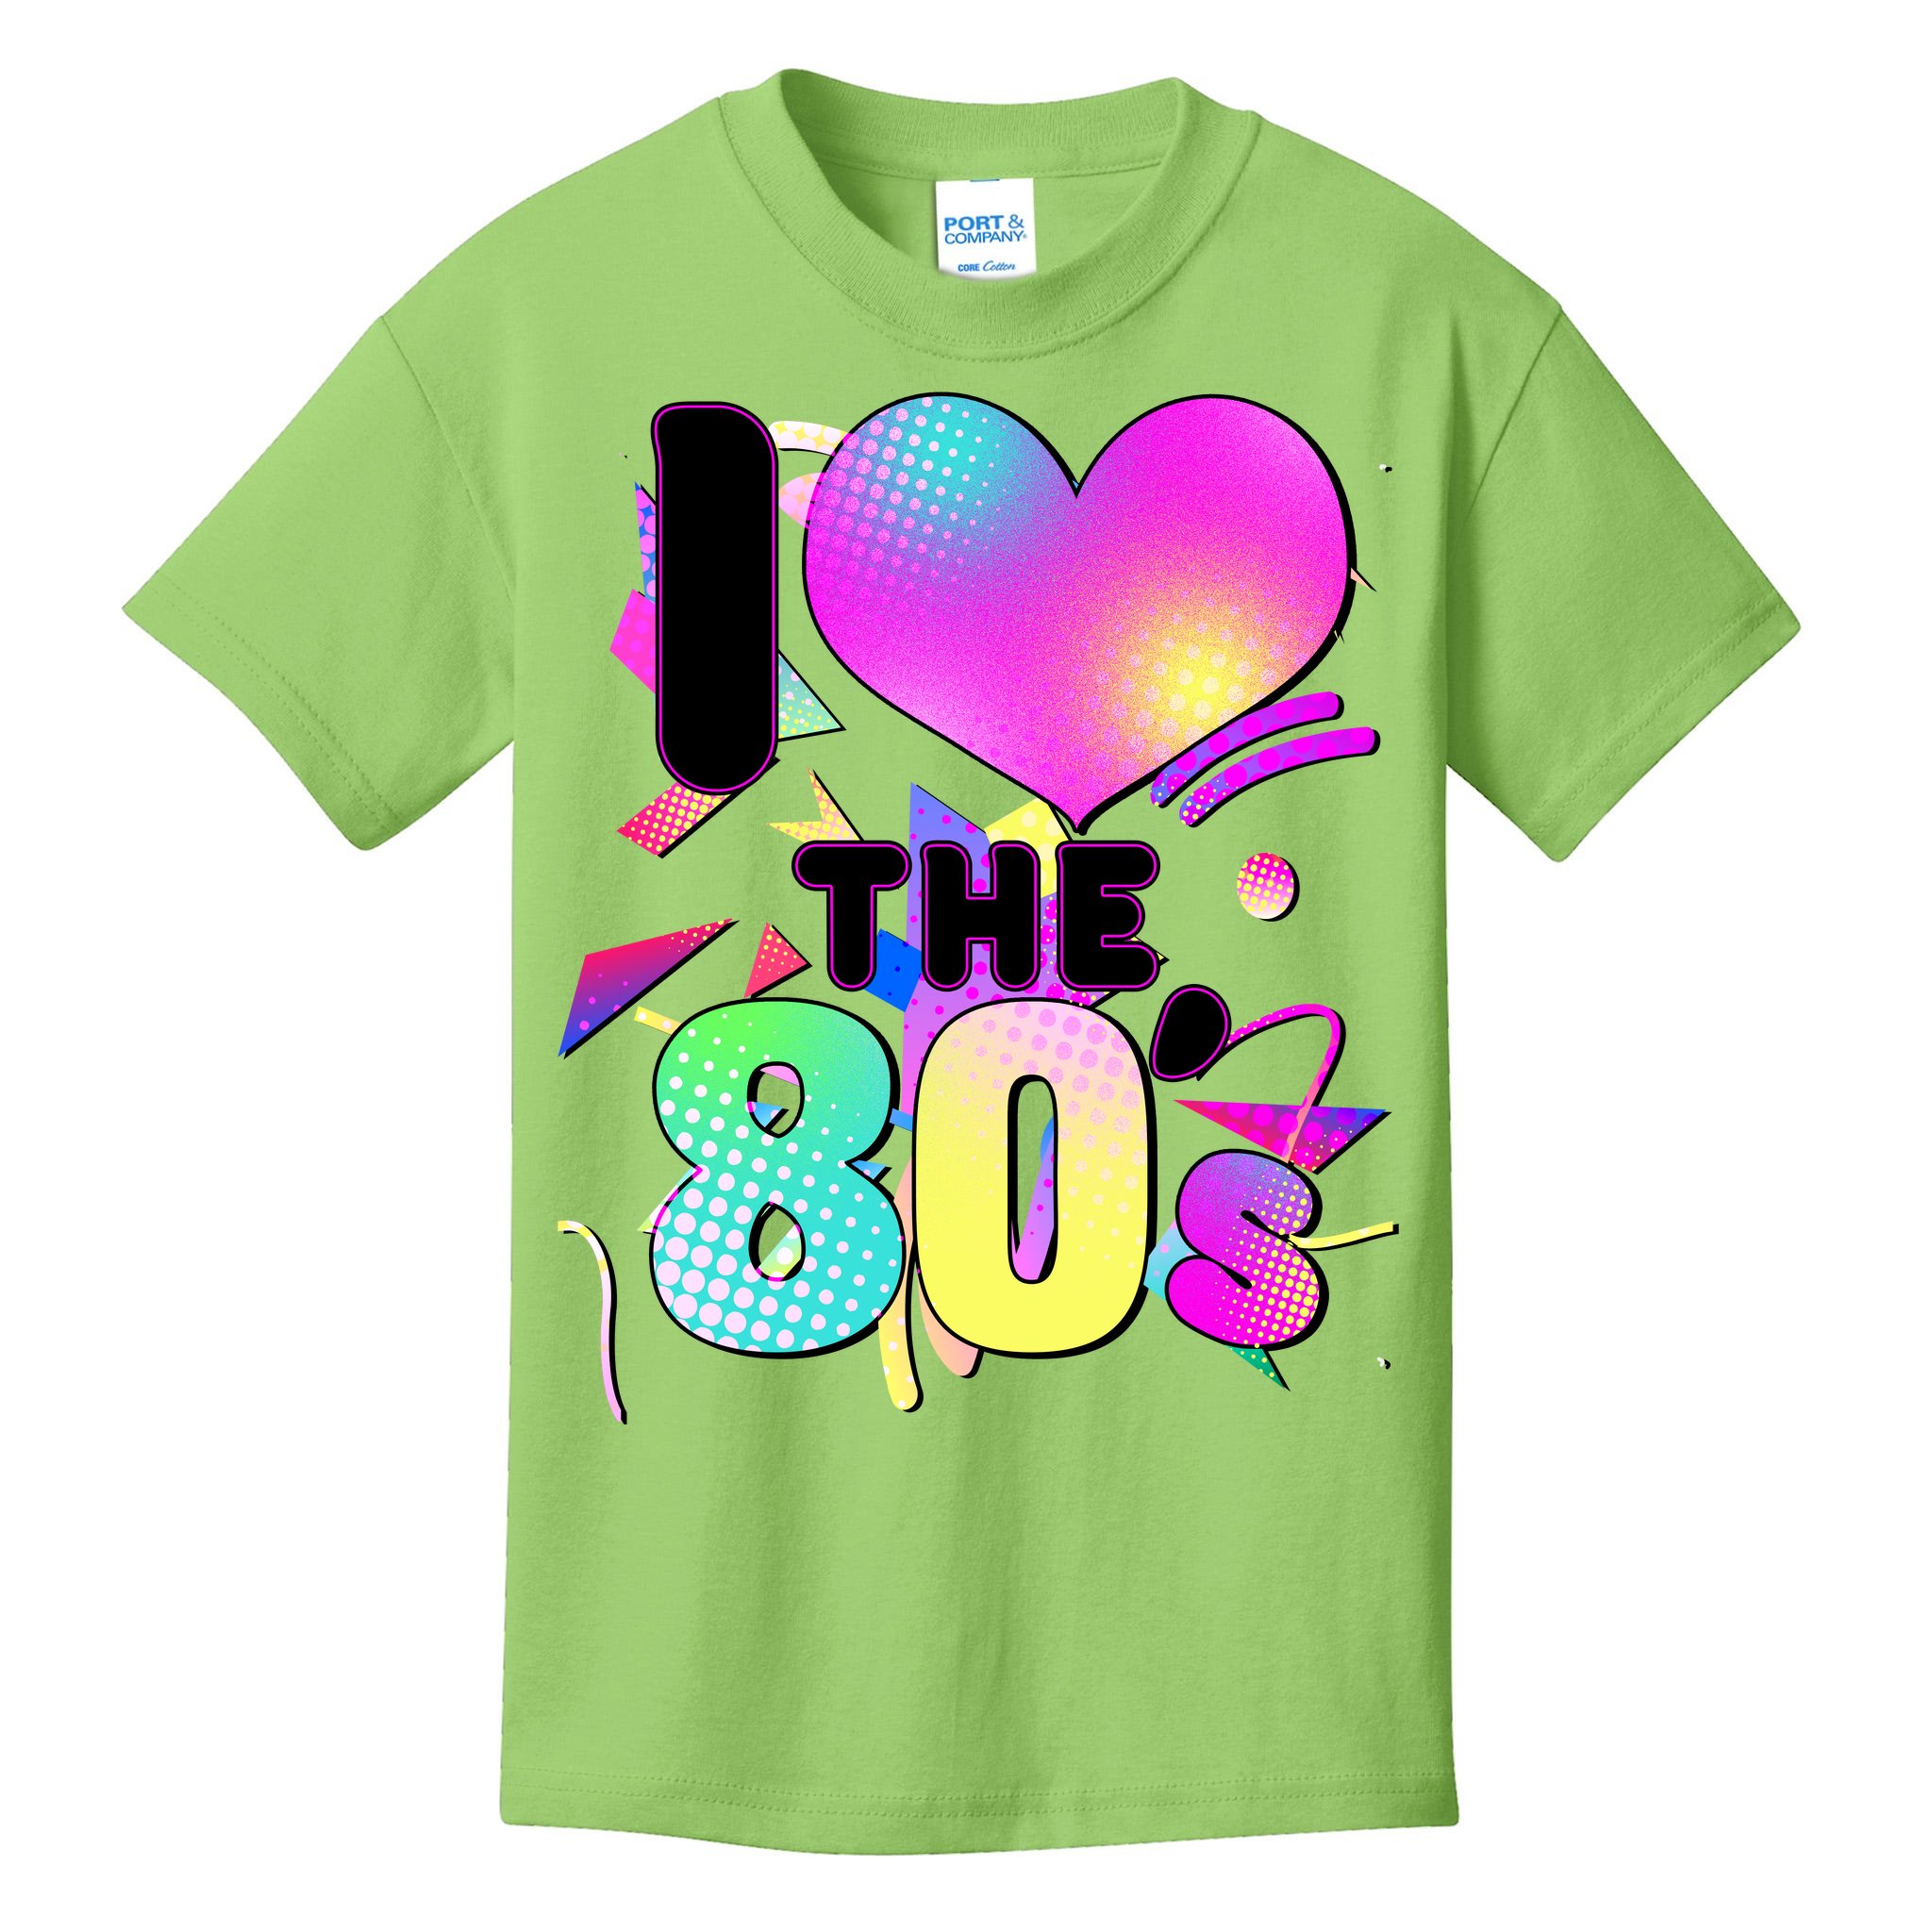 I LOVE THE 80s Ladies T-Shirt 6-16 Outfit Fancy Dress Costume 80's Party Neon 